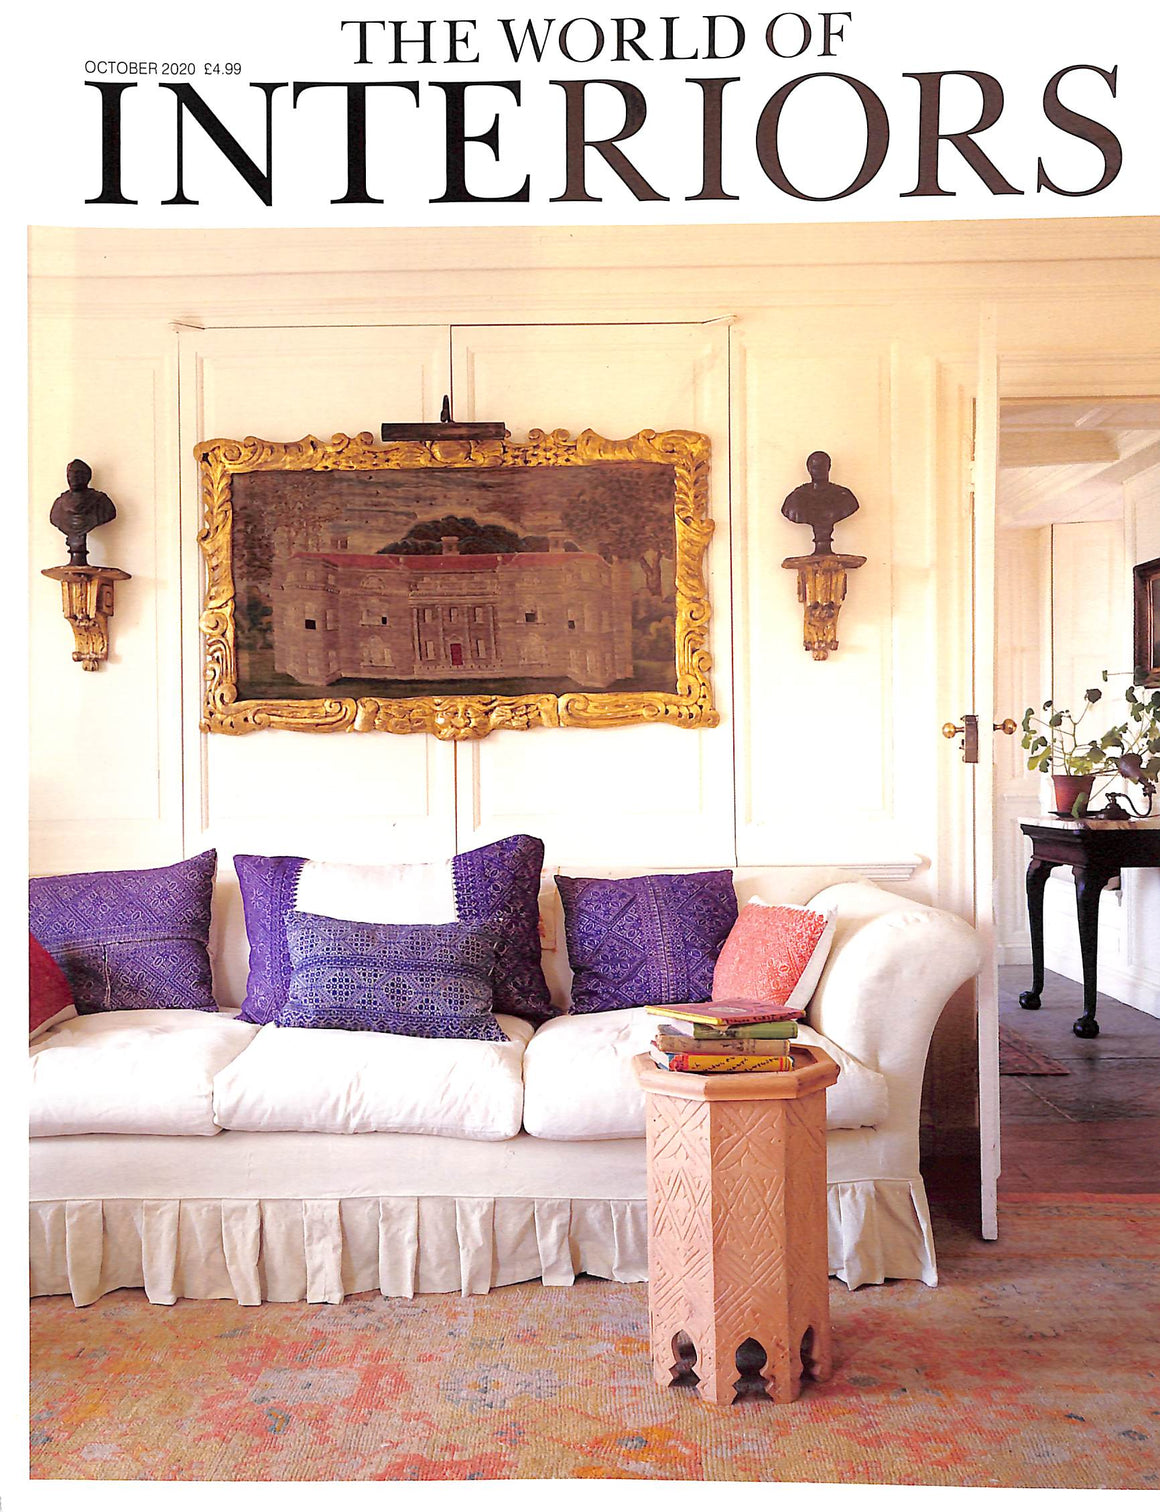 "The World Of Interiors" October 2020 (SOLD)